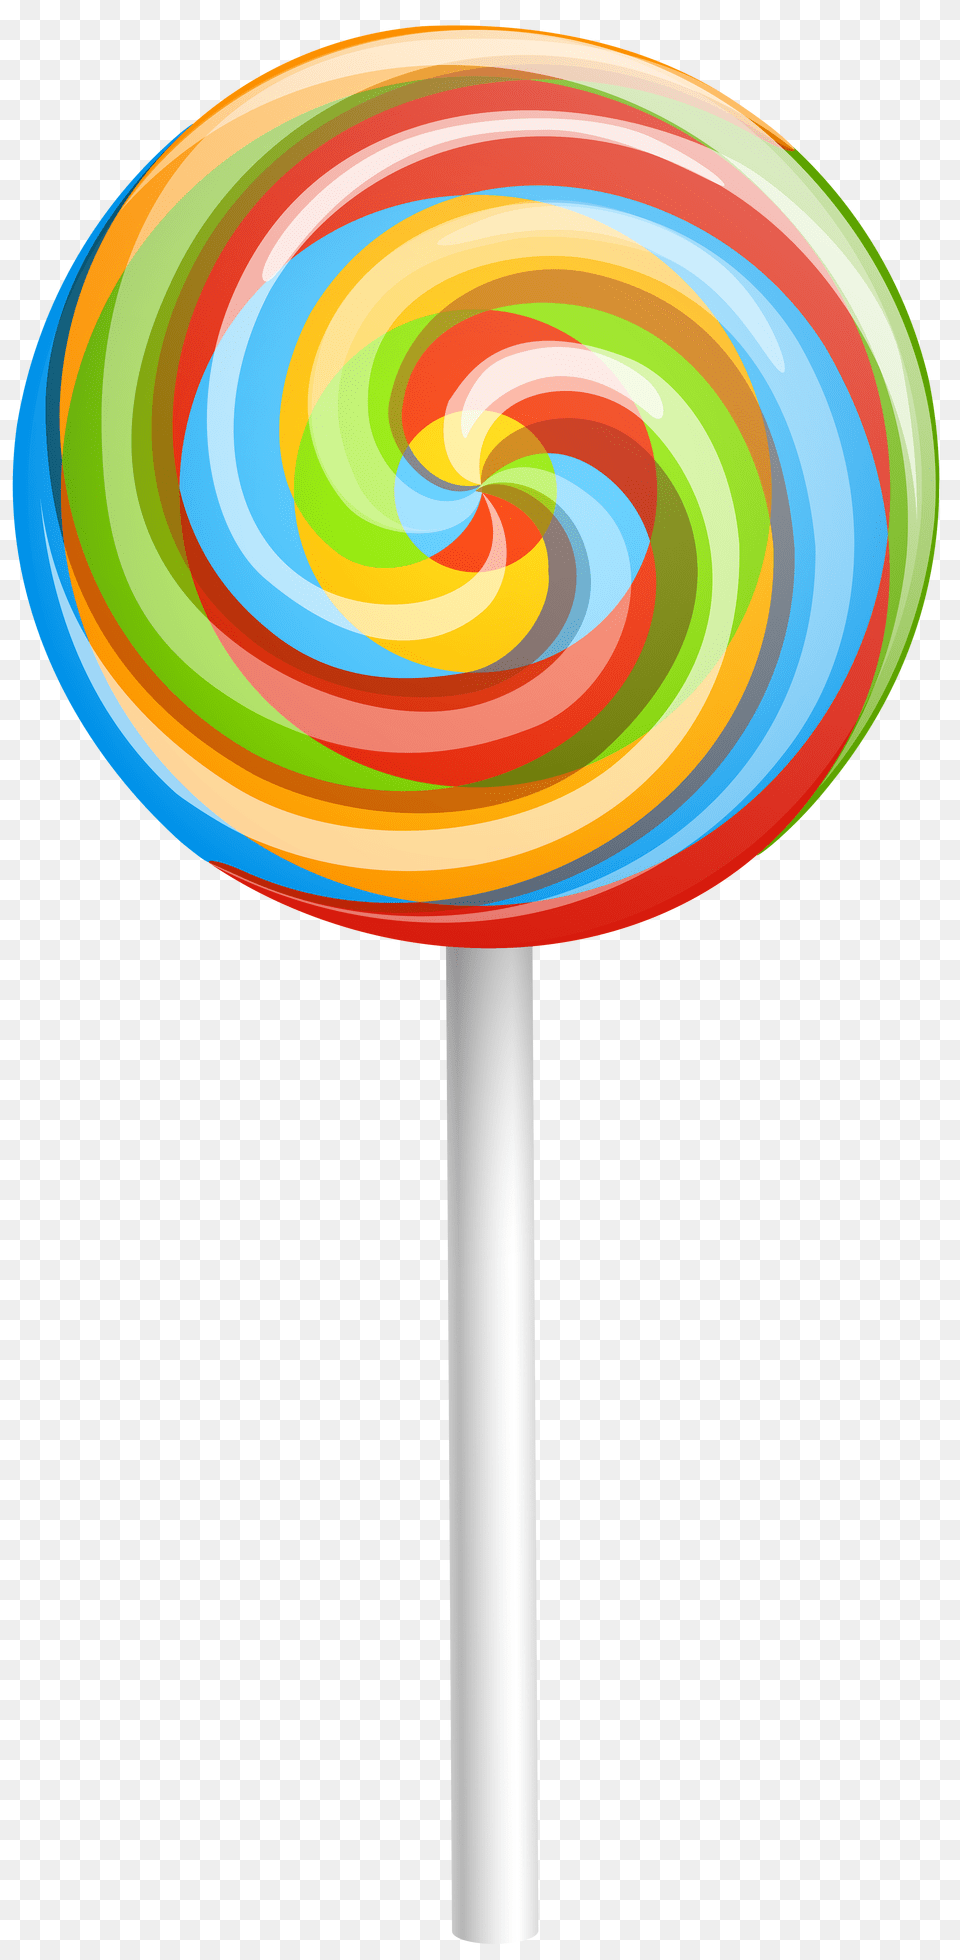 Candies 1 Image Lollipop, Candy, Food, Sweets Free Png Download